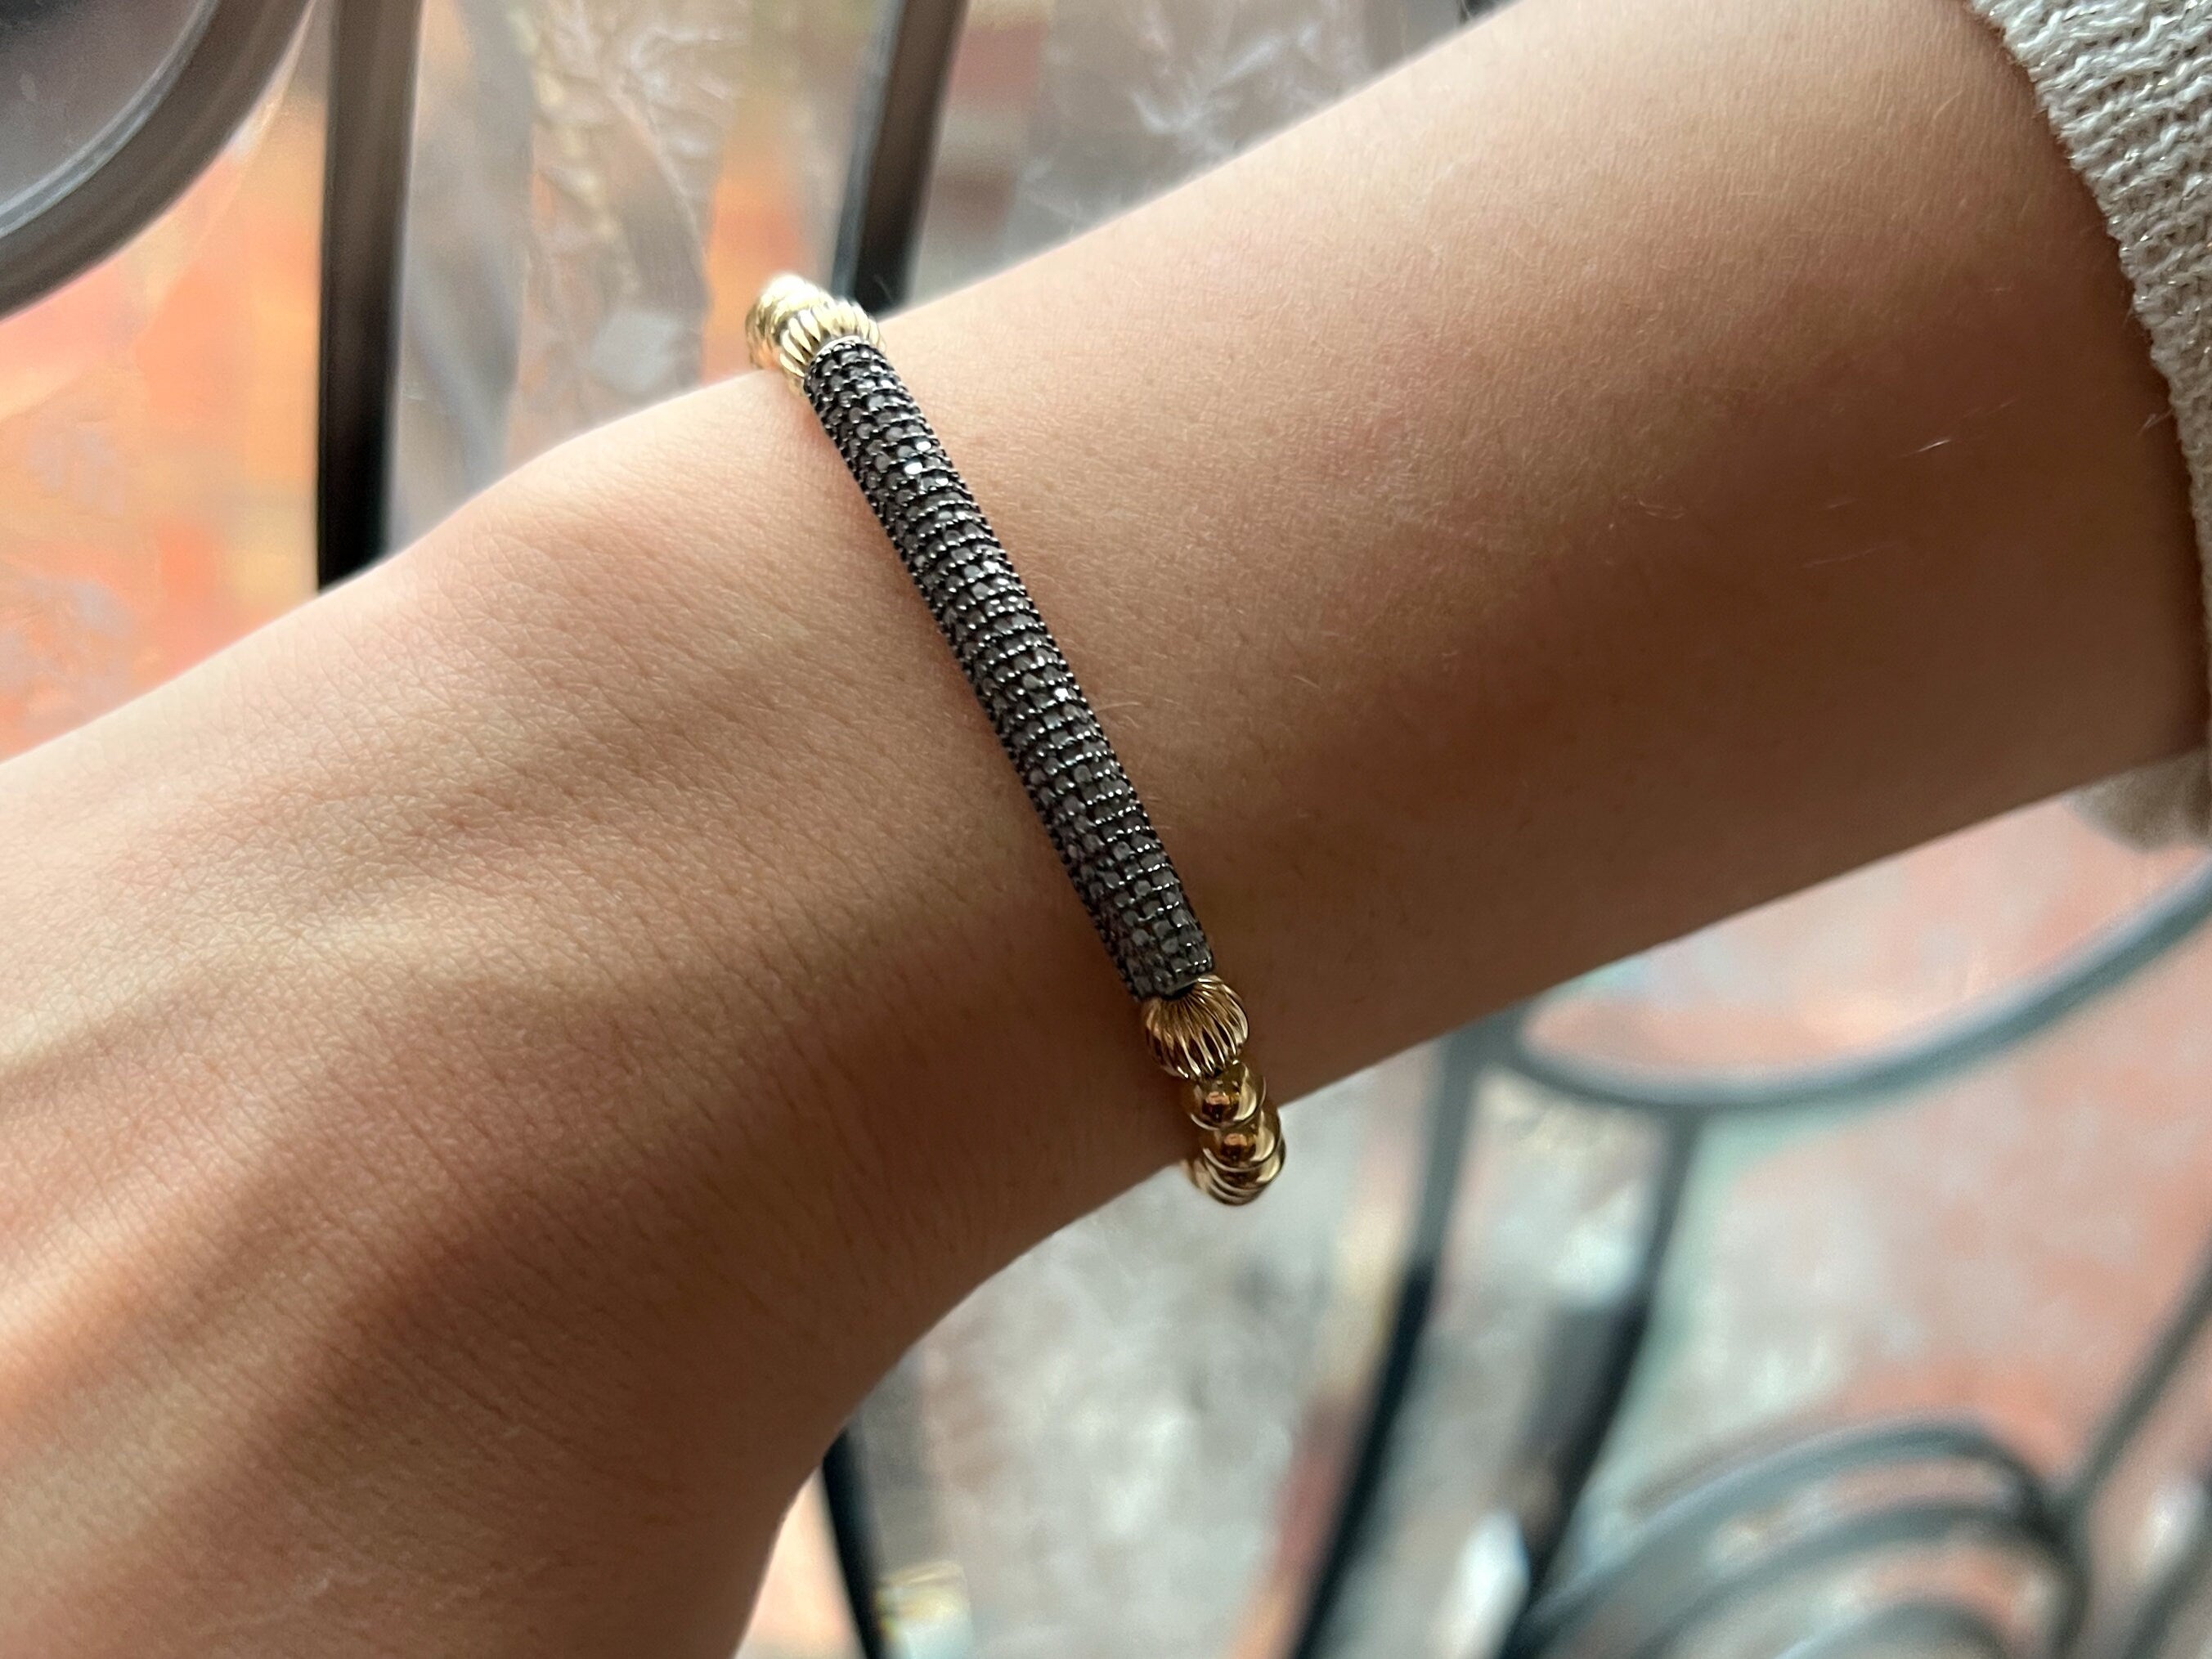 Natural_Gemstones,Pave_Diamond_Bar,Pave_Diamonds,Gold_bead_bracelet,Stretch_bracelet,Gold_and_Diamonds,Bar_accent_bracelet,Handmade_bracelet,Black_and_gold,Gift_for_Her,Gift_for_Mom,Popular_gifts,Oxidized_silver